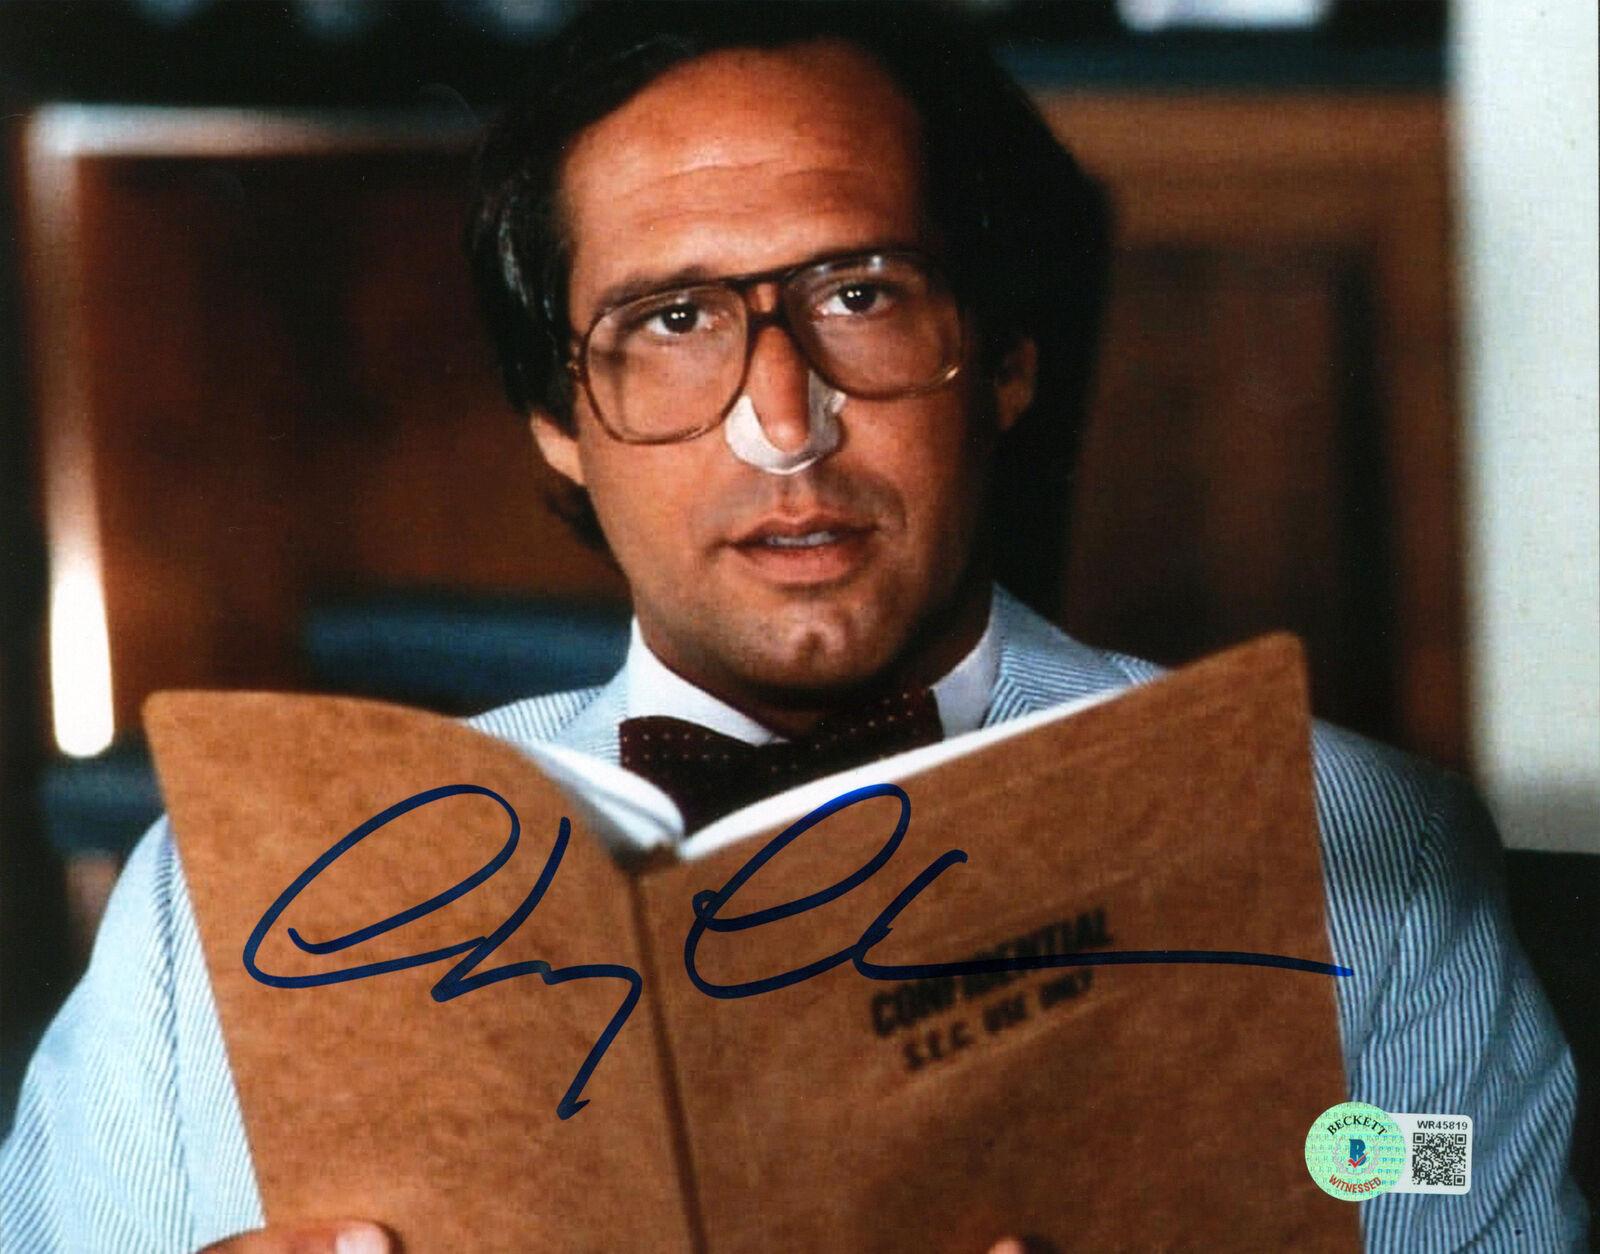 Chevy Chase Fletch Authentic Signed 8x10 Broken Nose Photo Poster painting BAS Witnessed